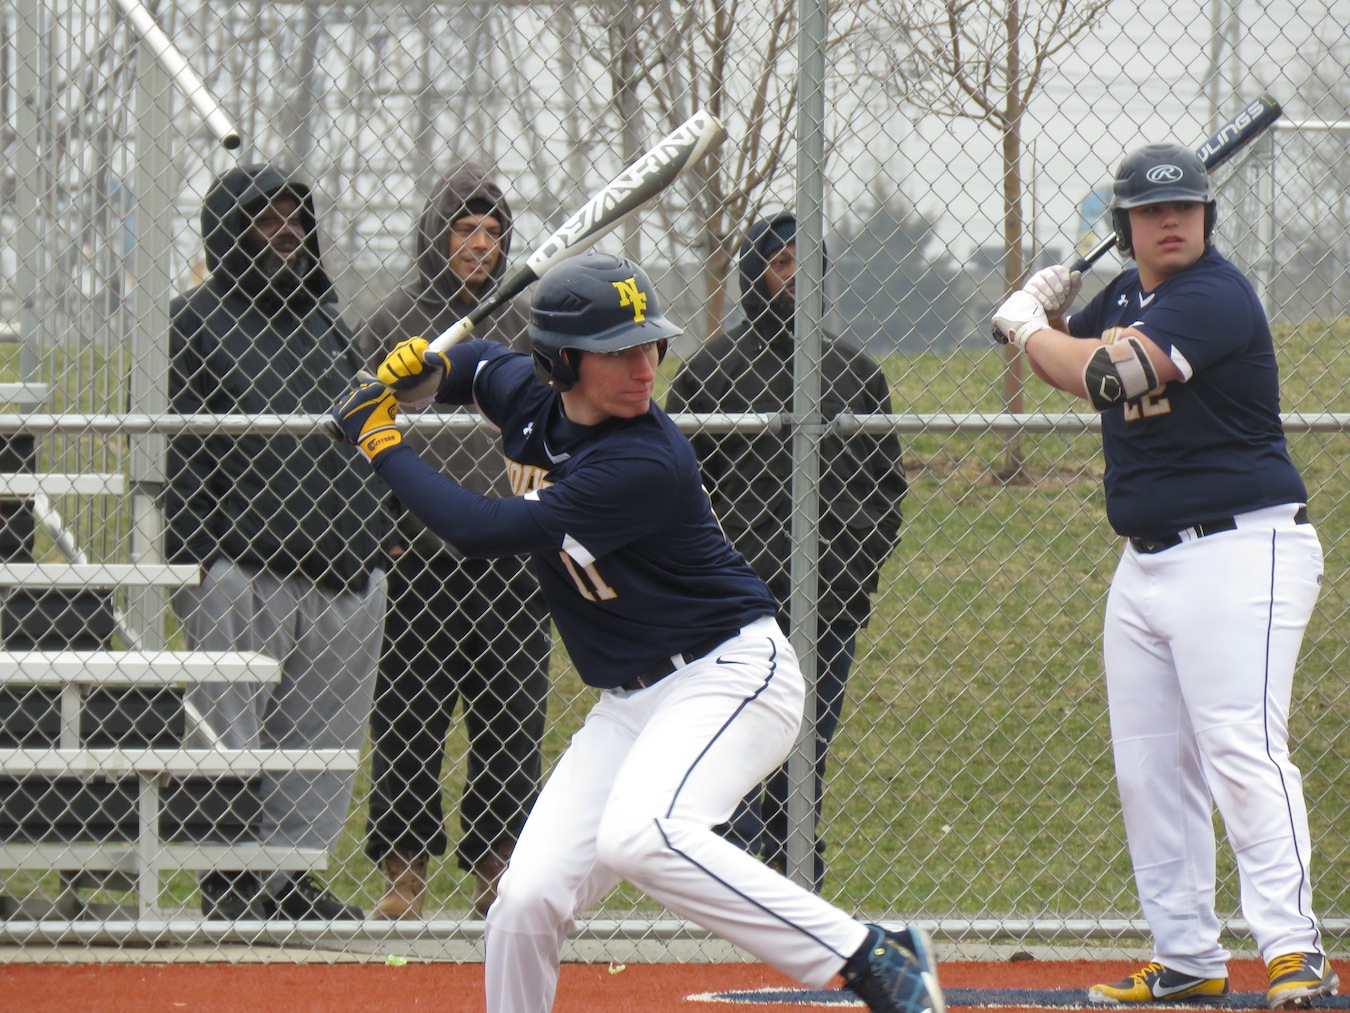 Junior Dom Geracitano loads up his swing before hitting a home run versus Wilson on Tuesday. (Photo by David Yarger)